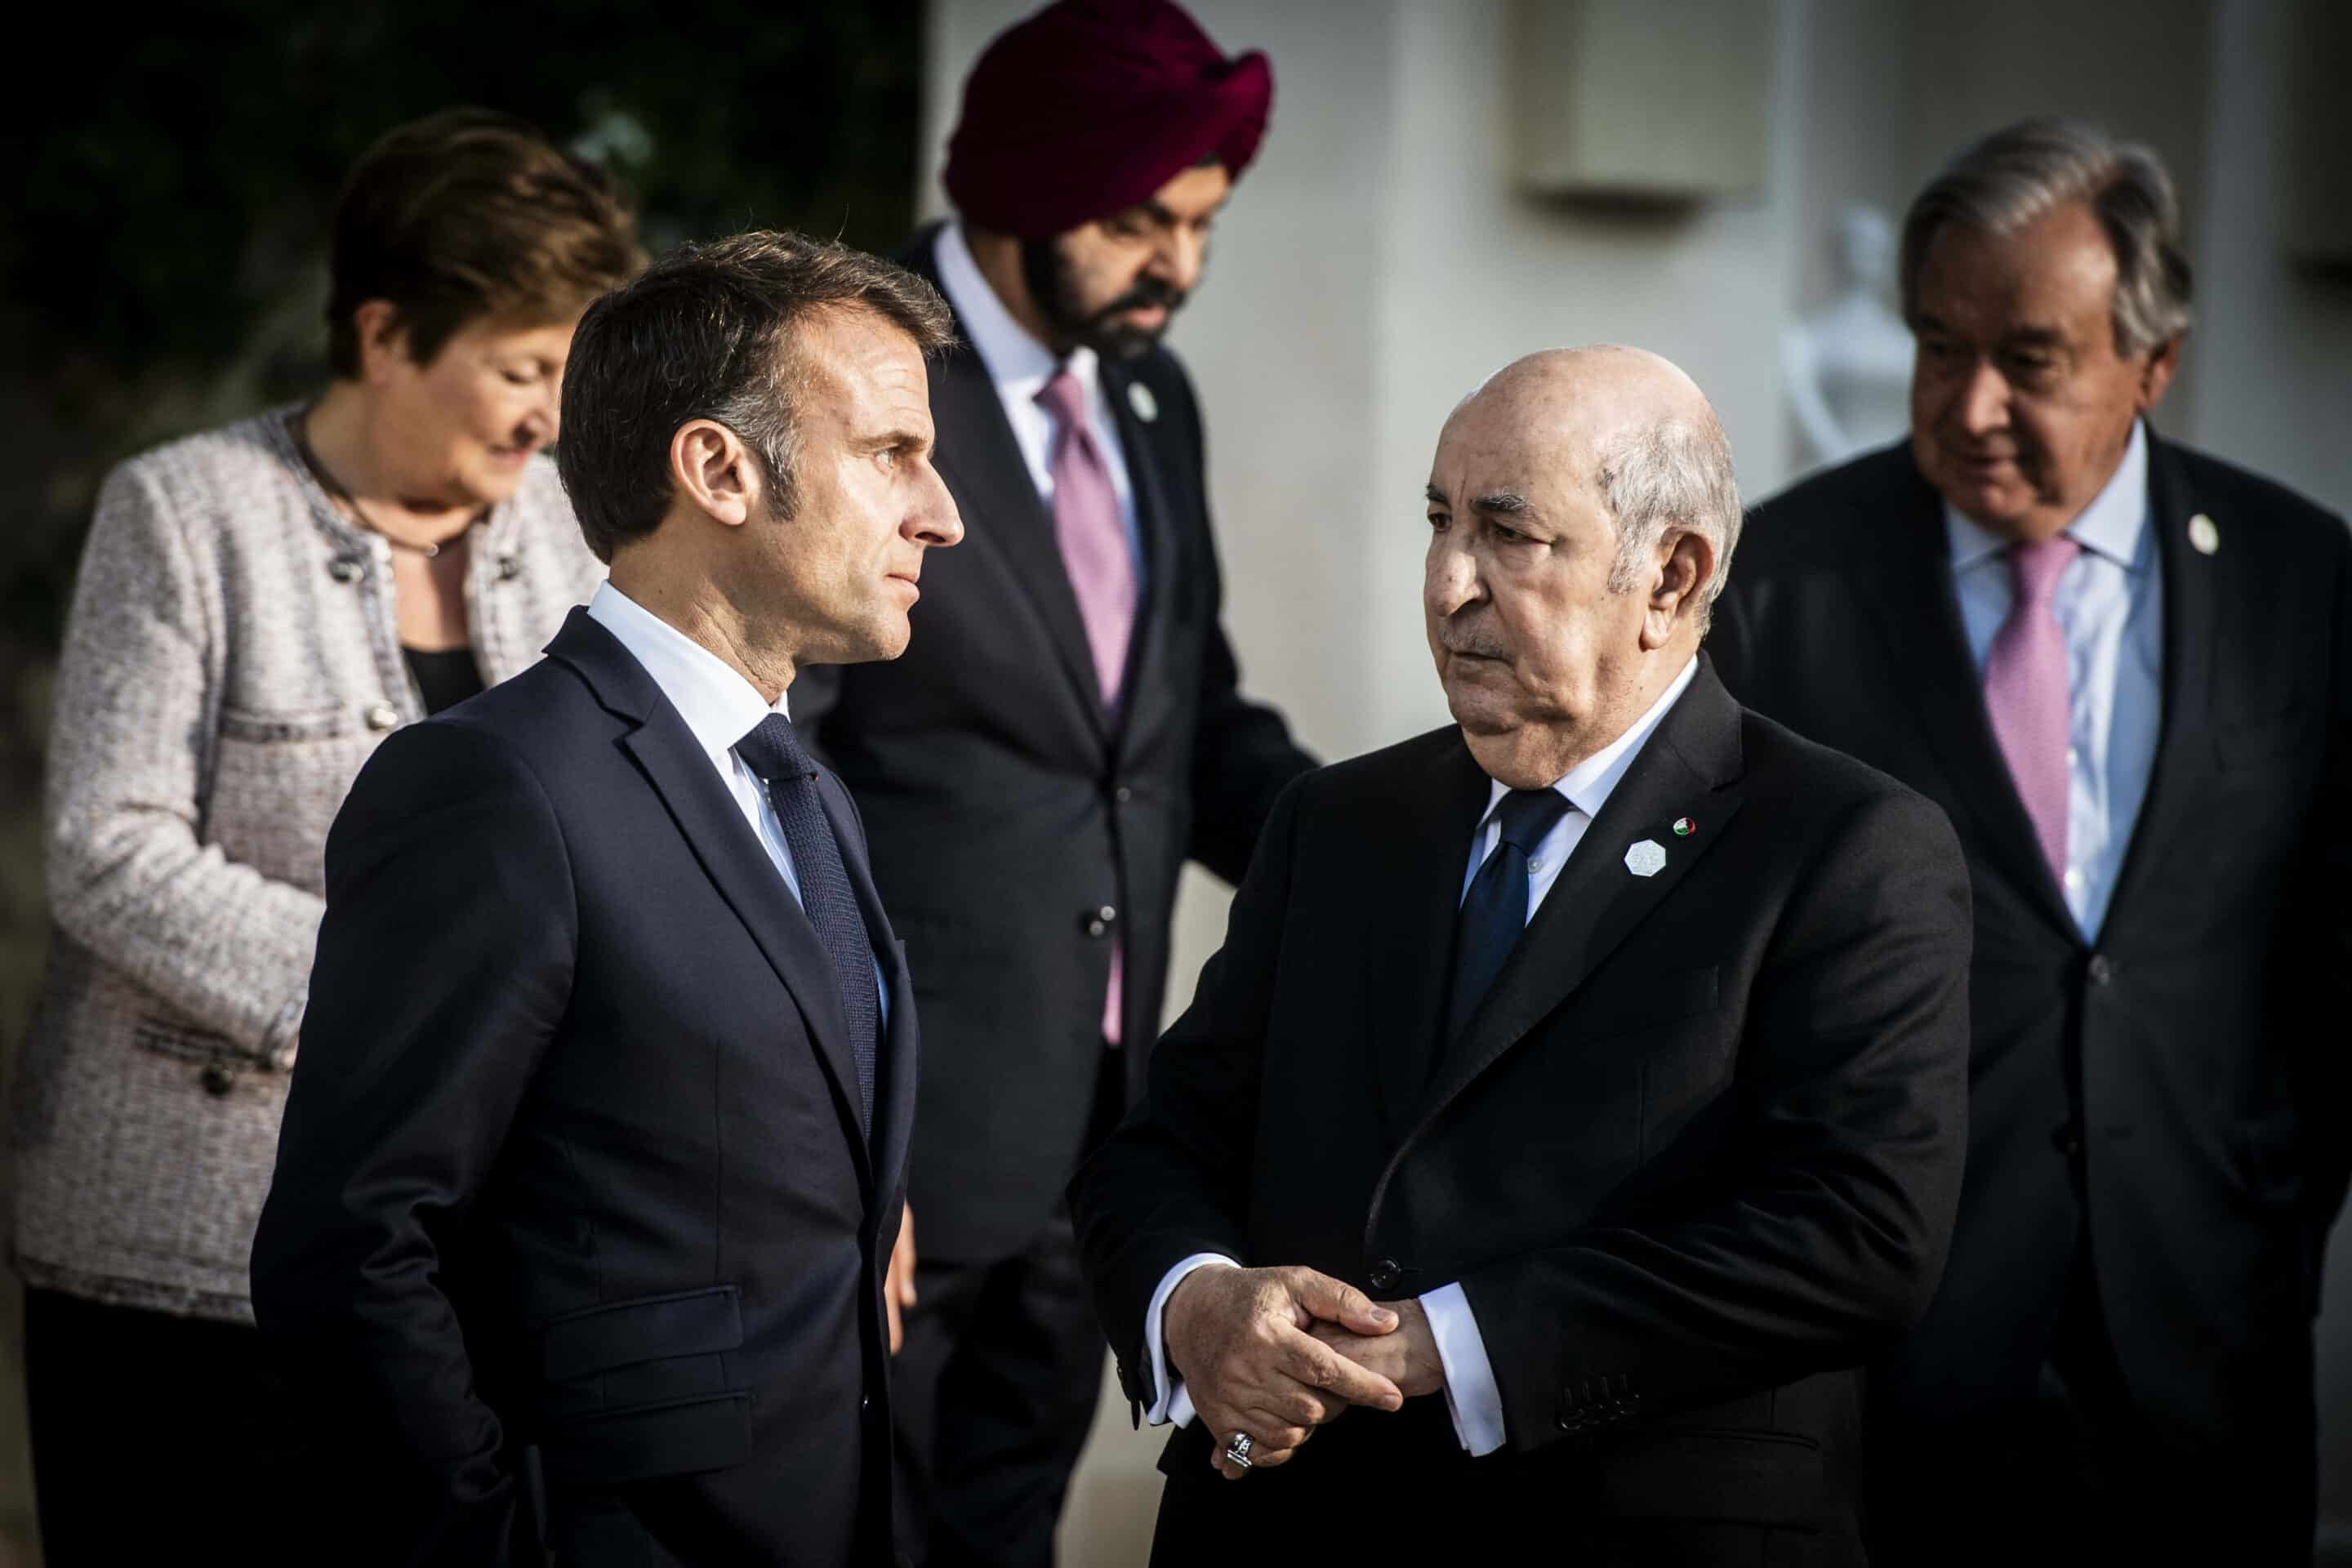 EMMANUEL MACRON, Abdelmadjid Tebboune (c) Sipa 01162387_000086

 during the Second day of the G7 Heads of State Summit, Borgo Egnazia, Puglia, Italy 14 June 2024//AGFEDITORIAL_SEA140624-292/Credit:Alessandro Serran/AGF/SIPA/2406151319